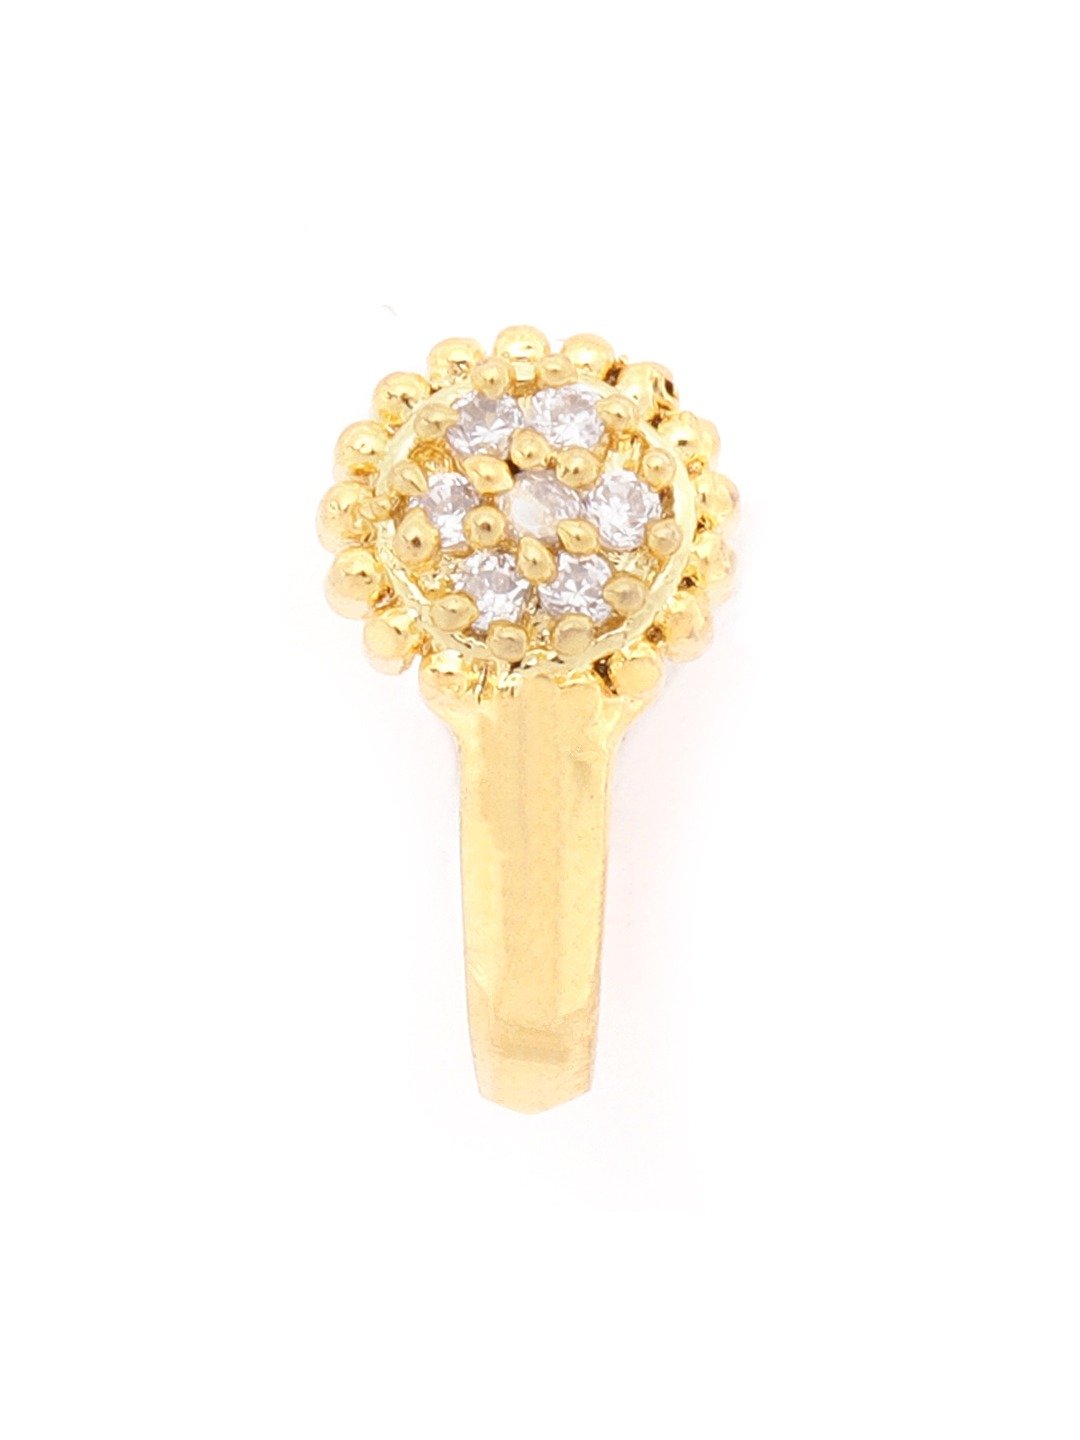 American Diamond Studded Gold Nose Ring